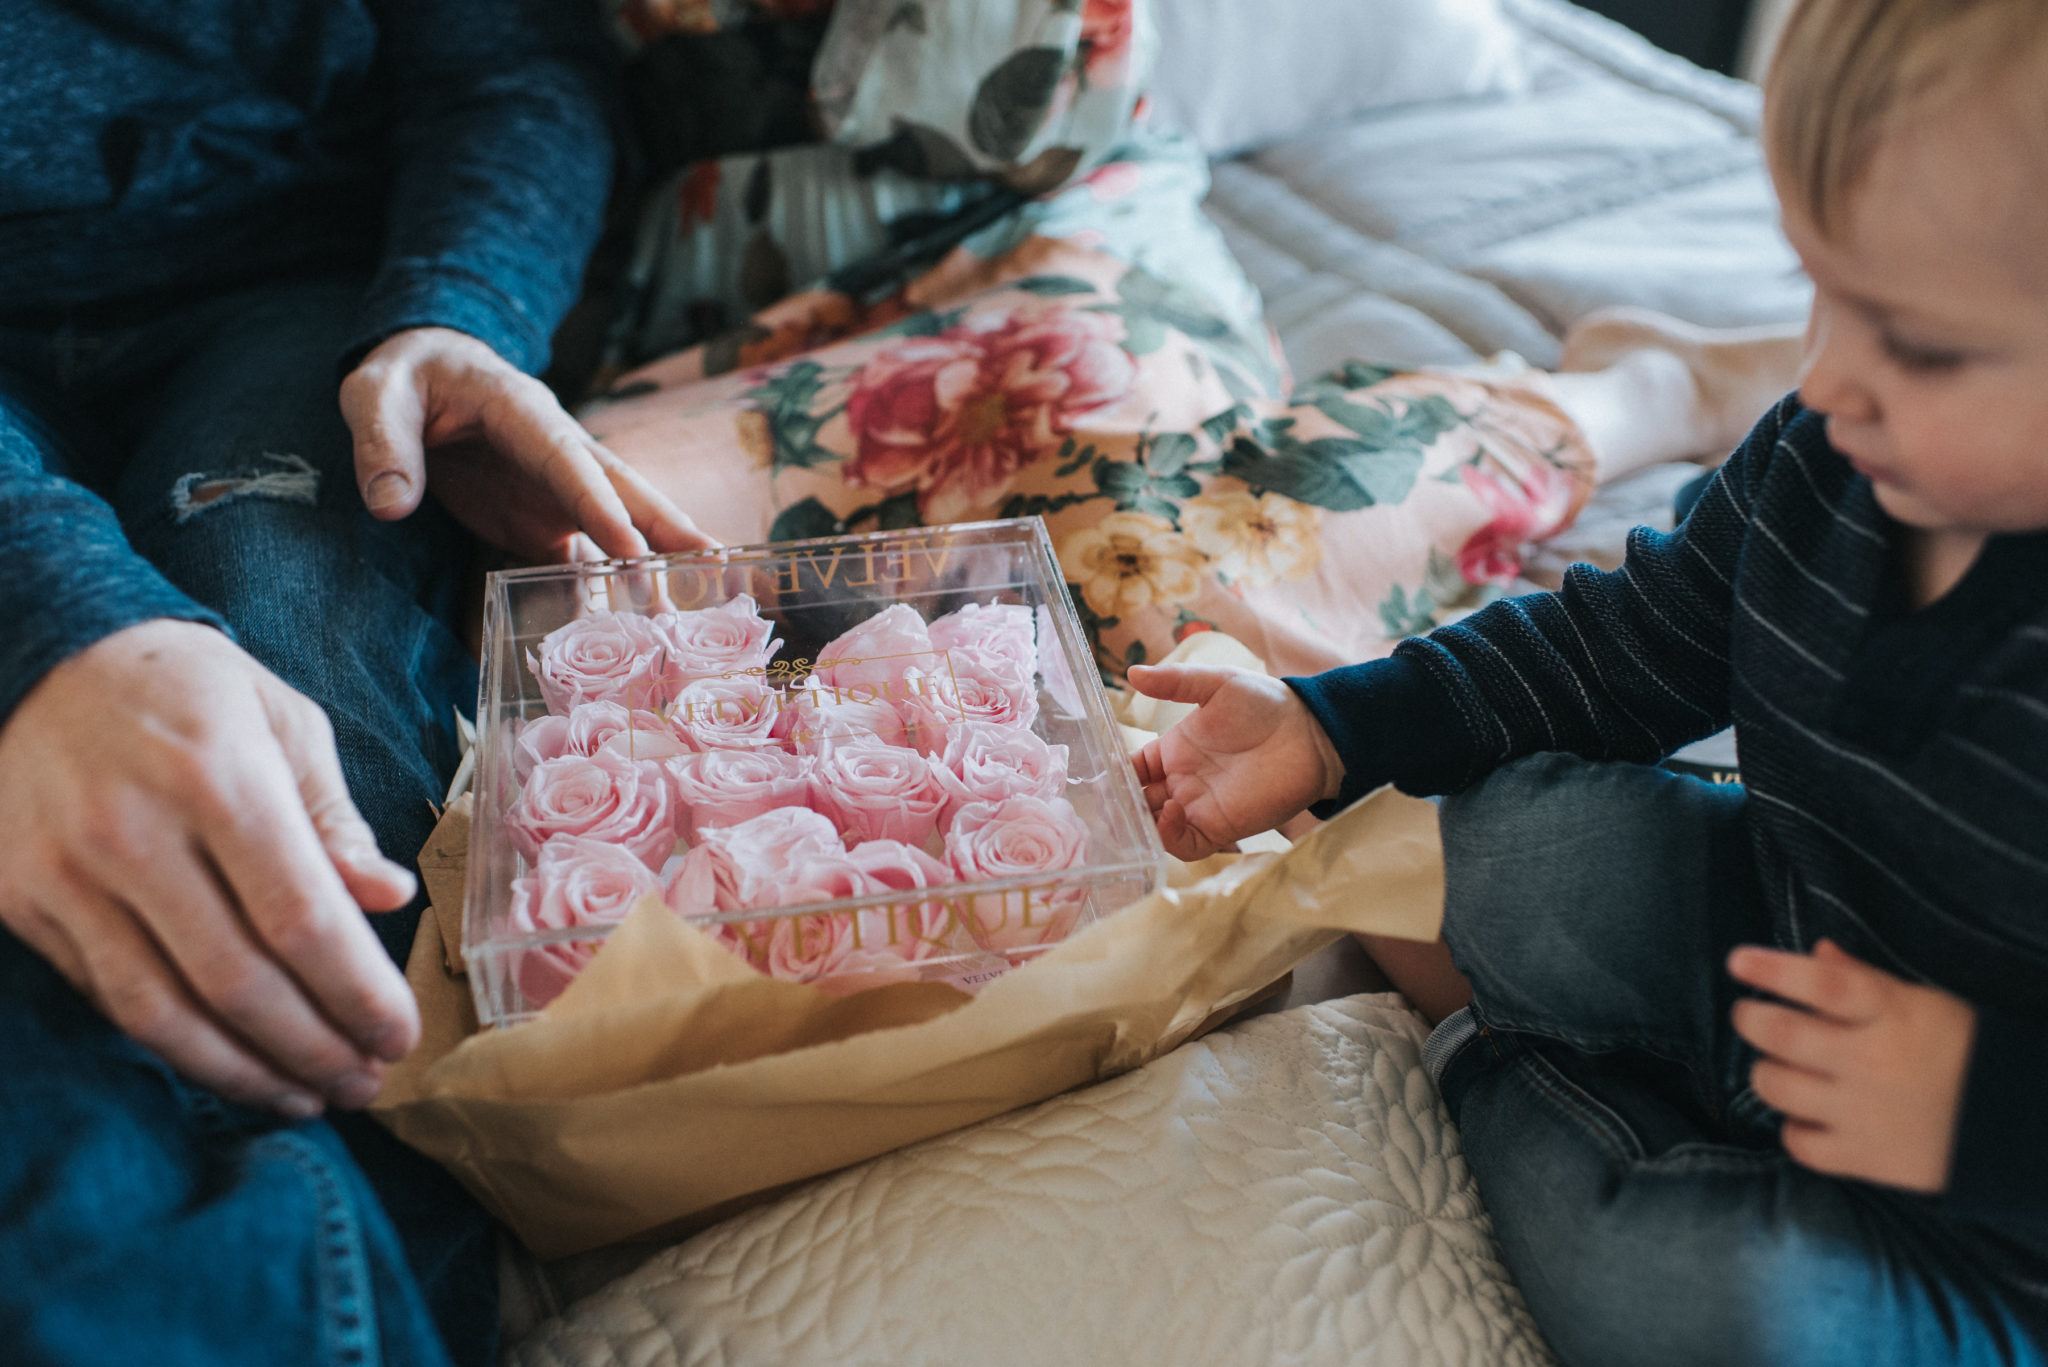 Velvetique la eternity roses that last a year - Gender Reveal Idea: It's a ... Boy or Girl?? by popular Las Vegas lifestyle blogger Outfits & Outings